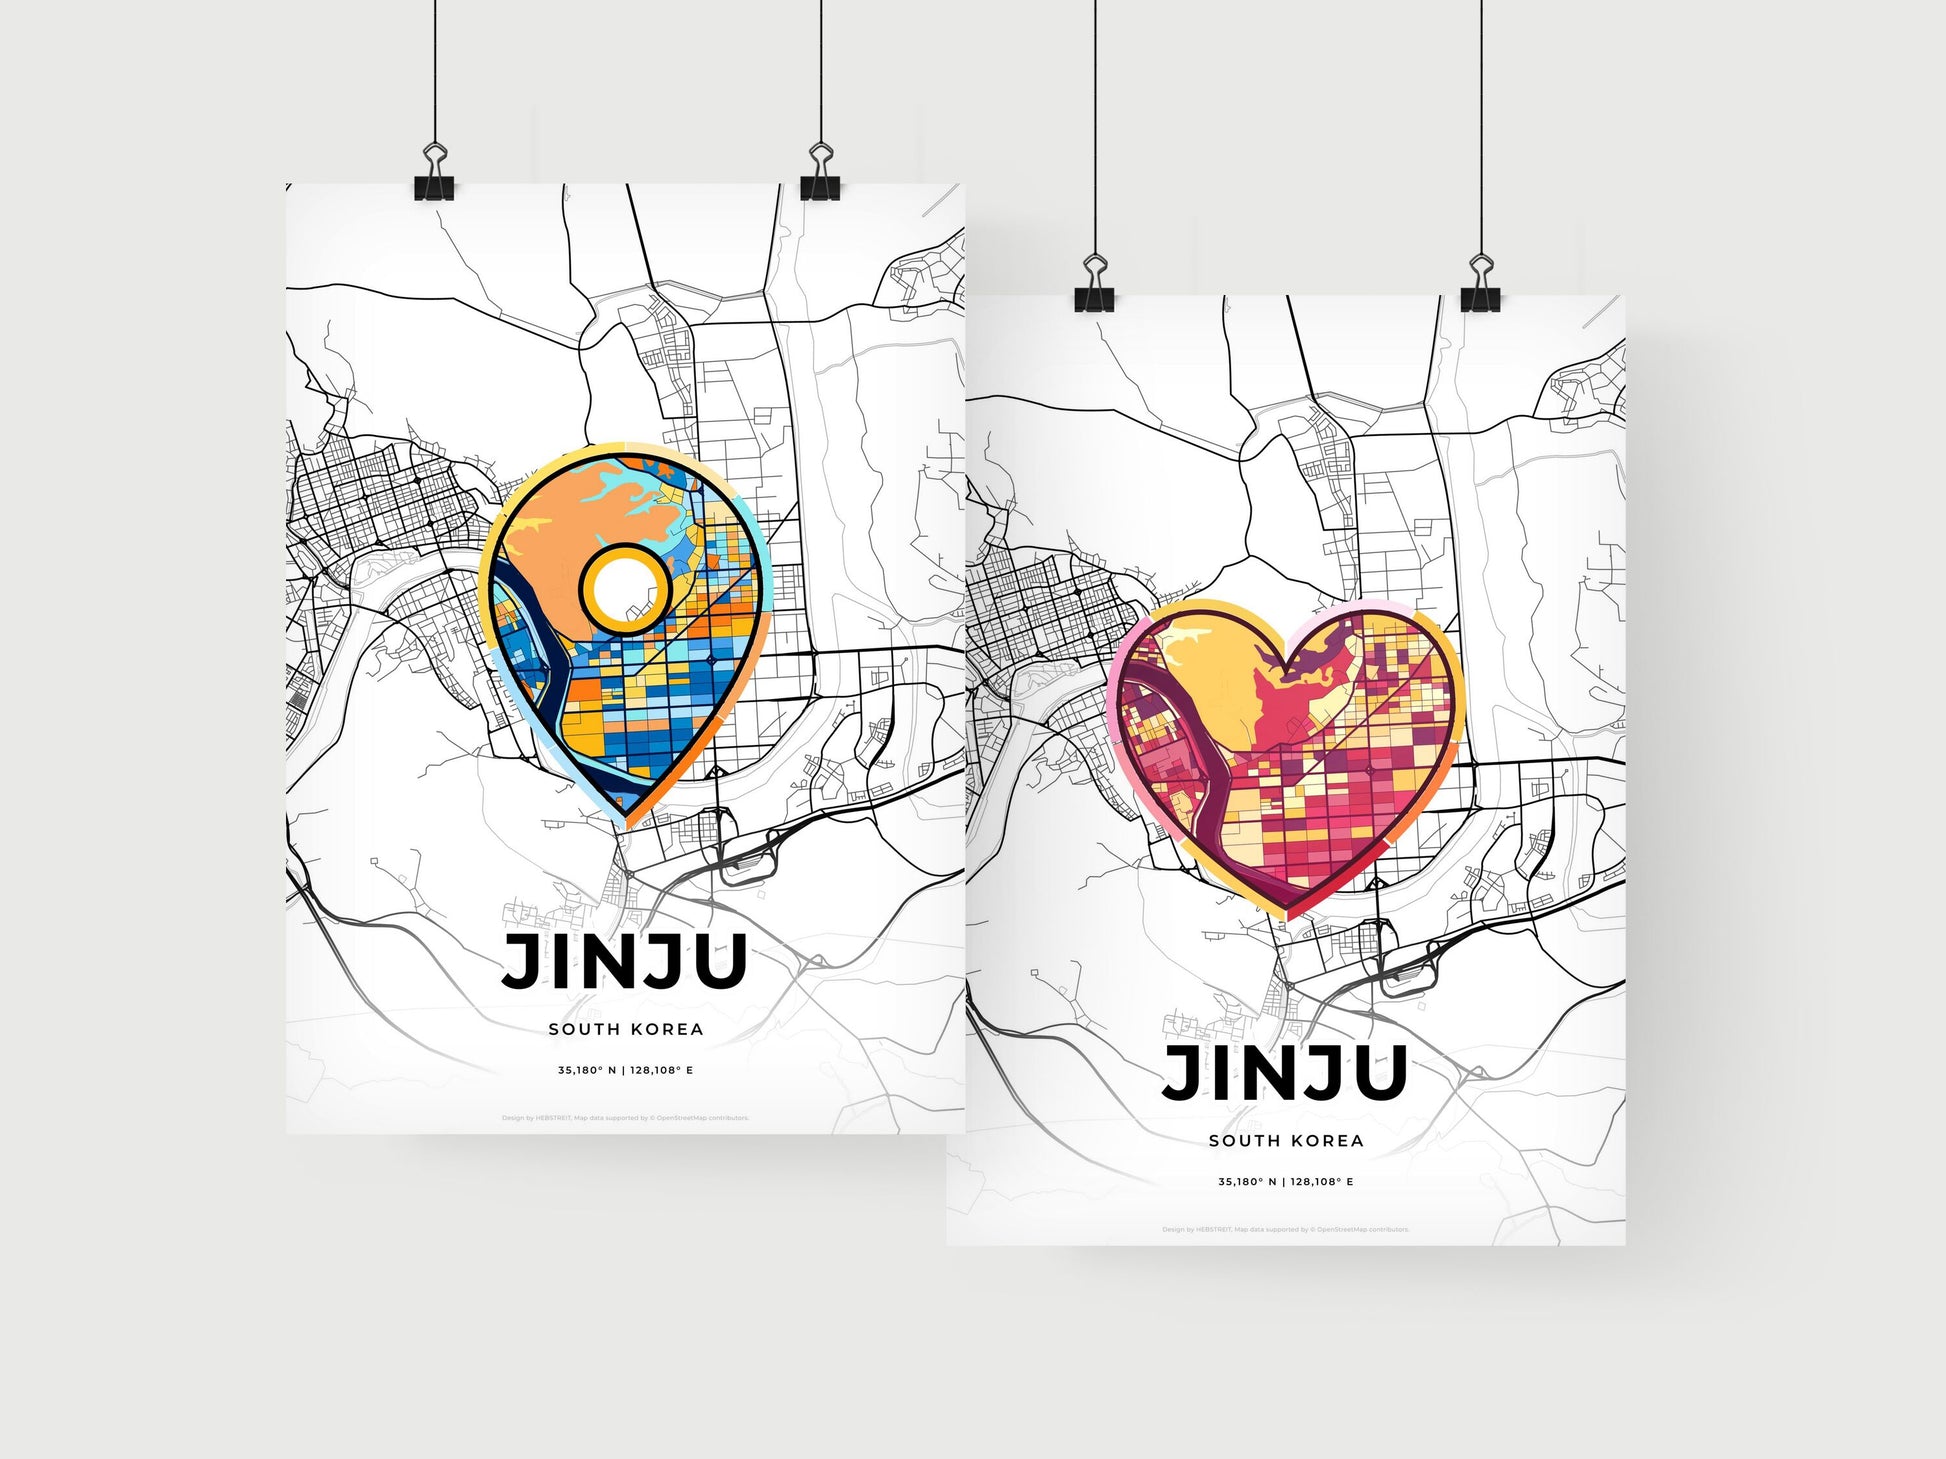 JINJU SOUTH KOREA minimal art map with a colorful icon. Where it all began, Couple map gift.